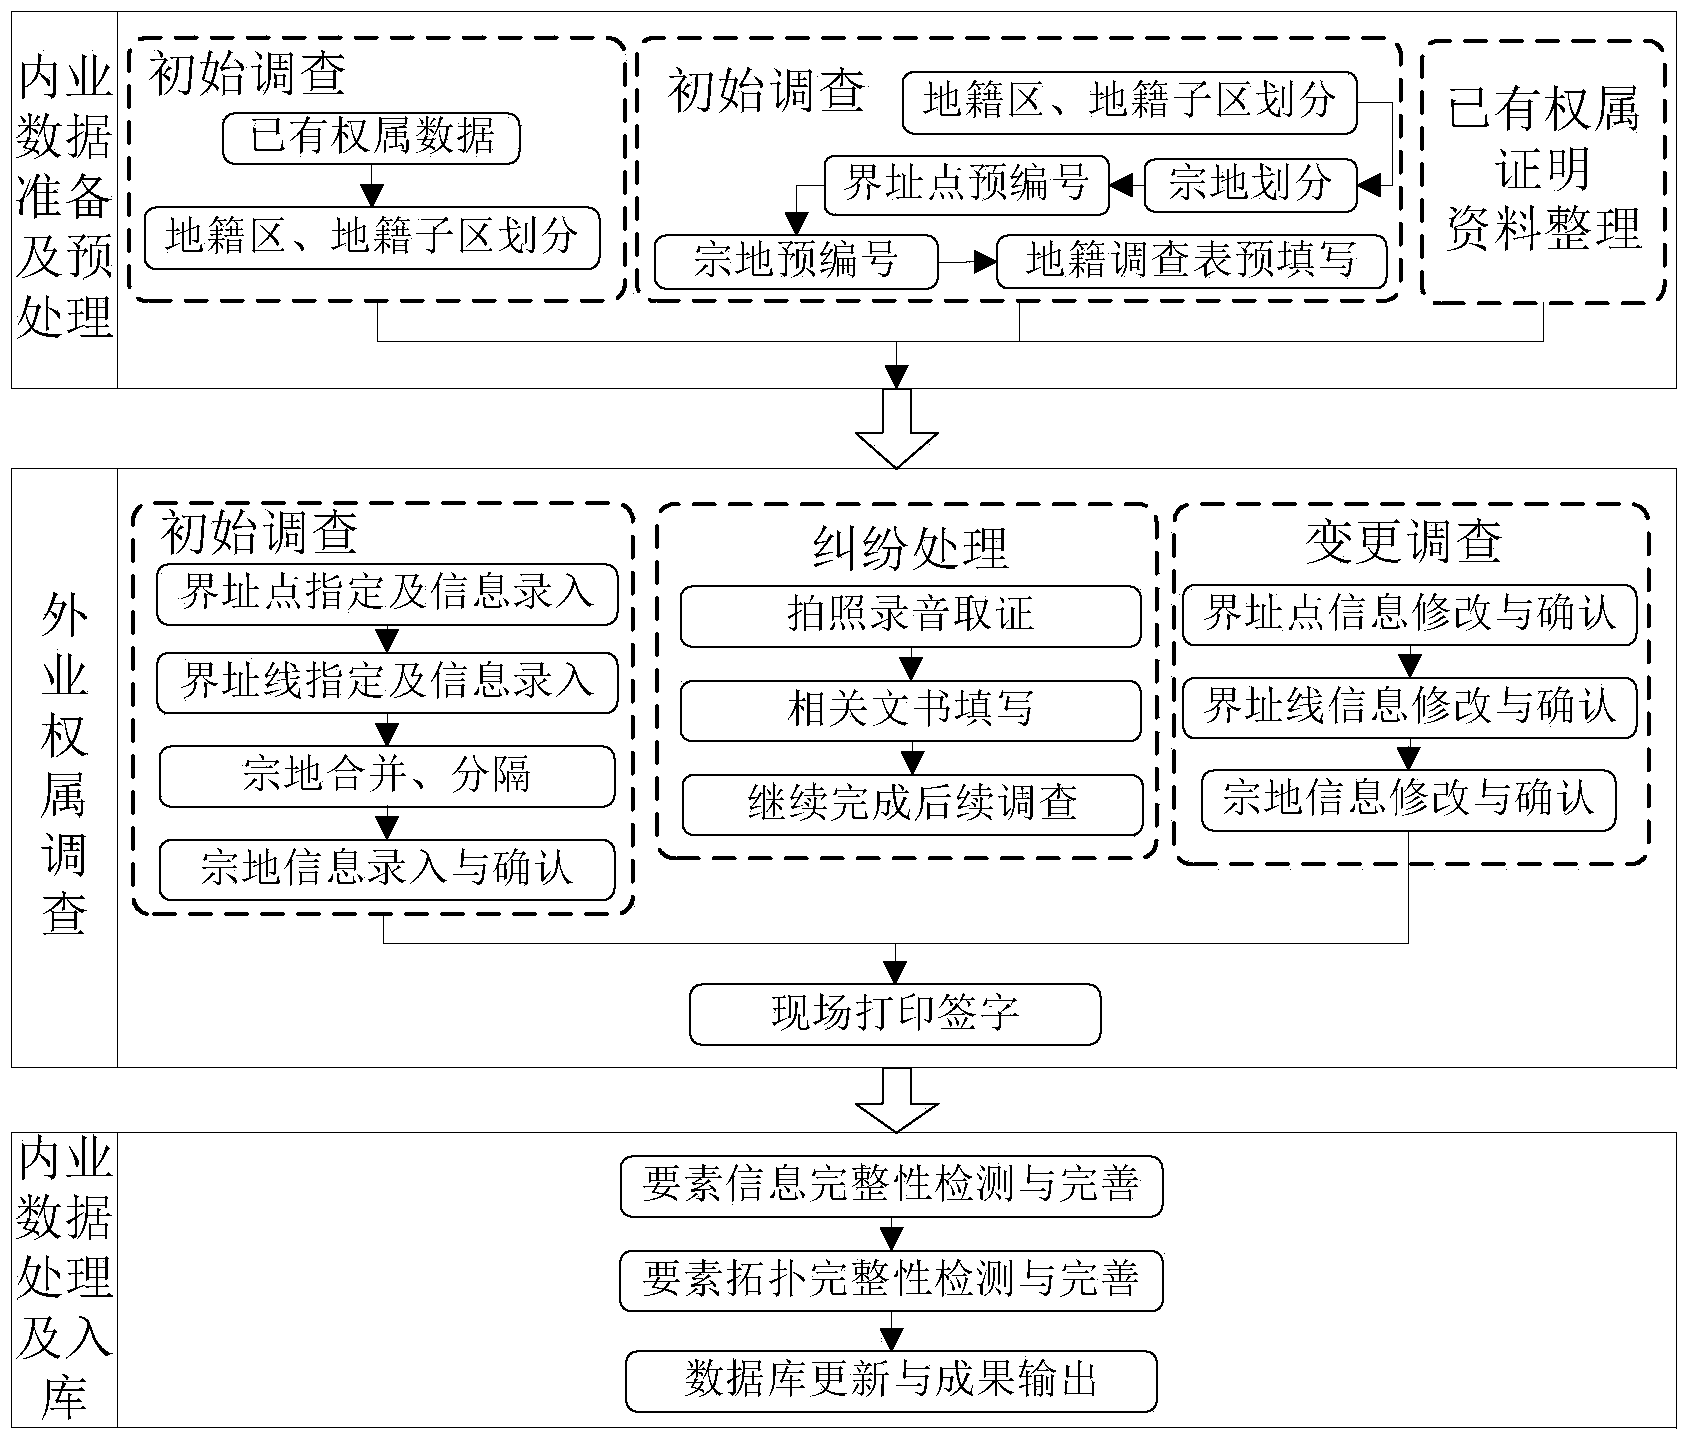 Electronization ownership investigation system and method based on mobile terminal